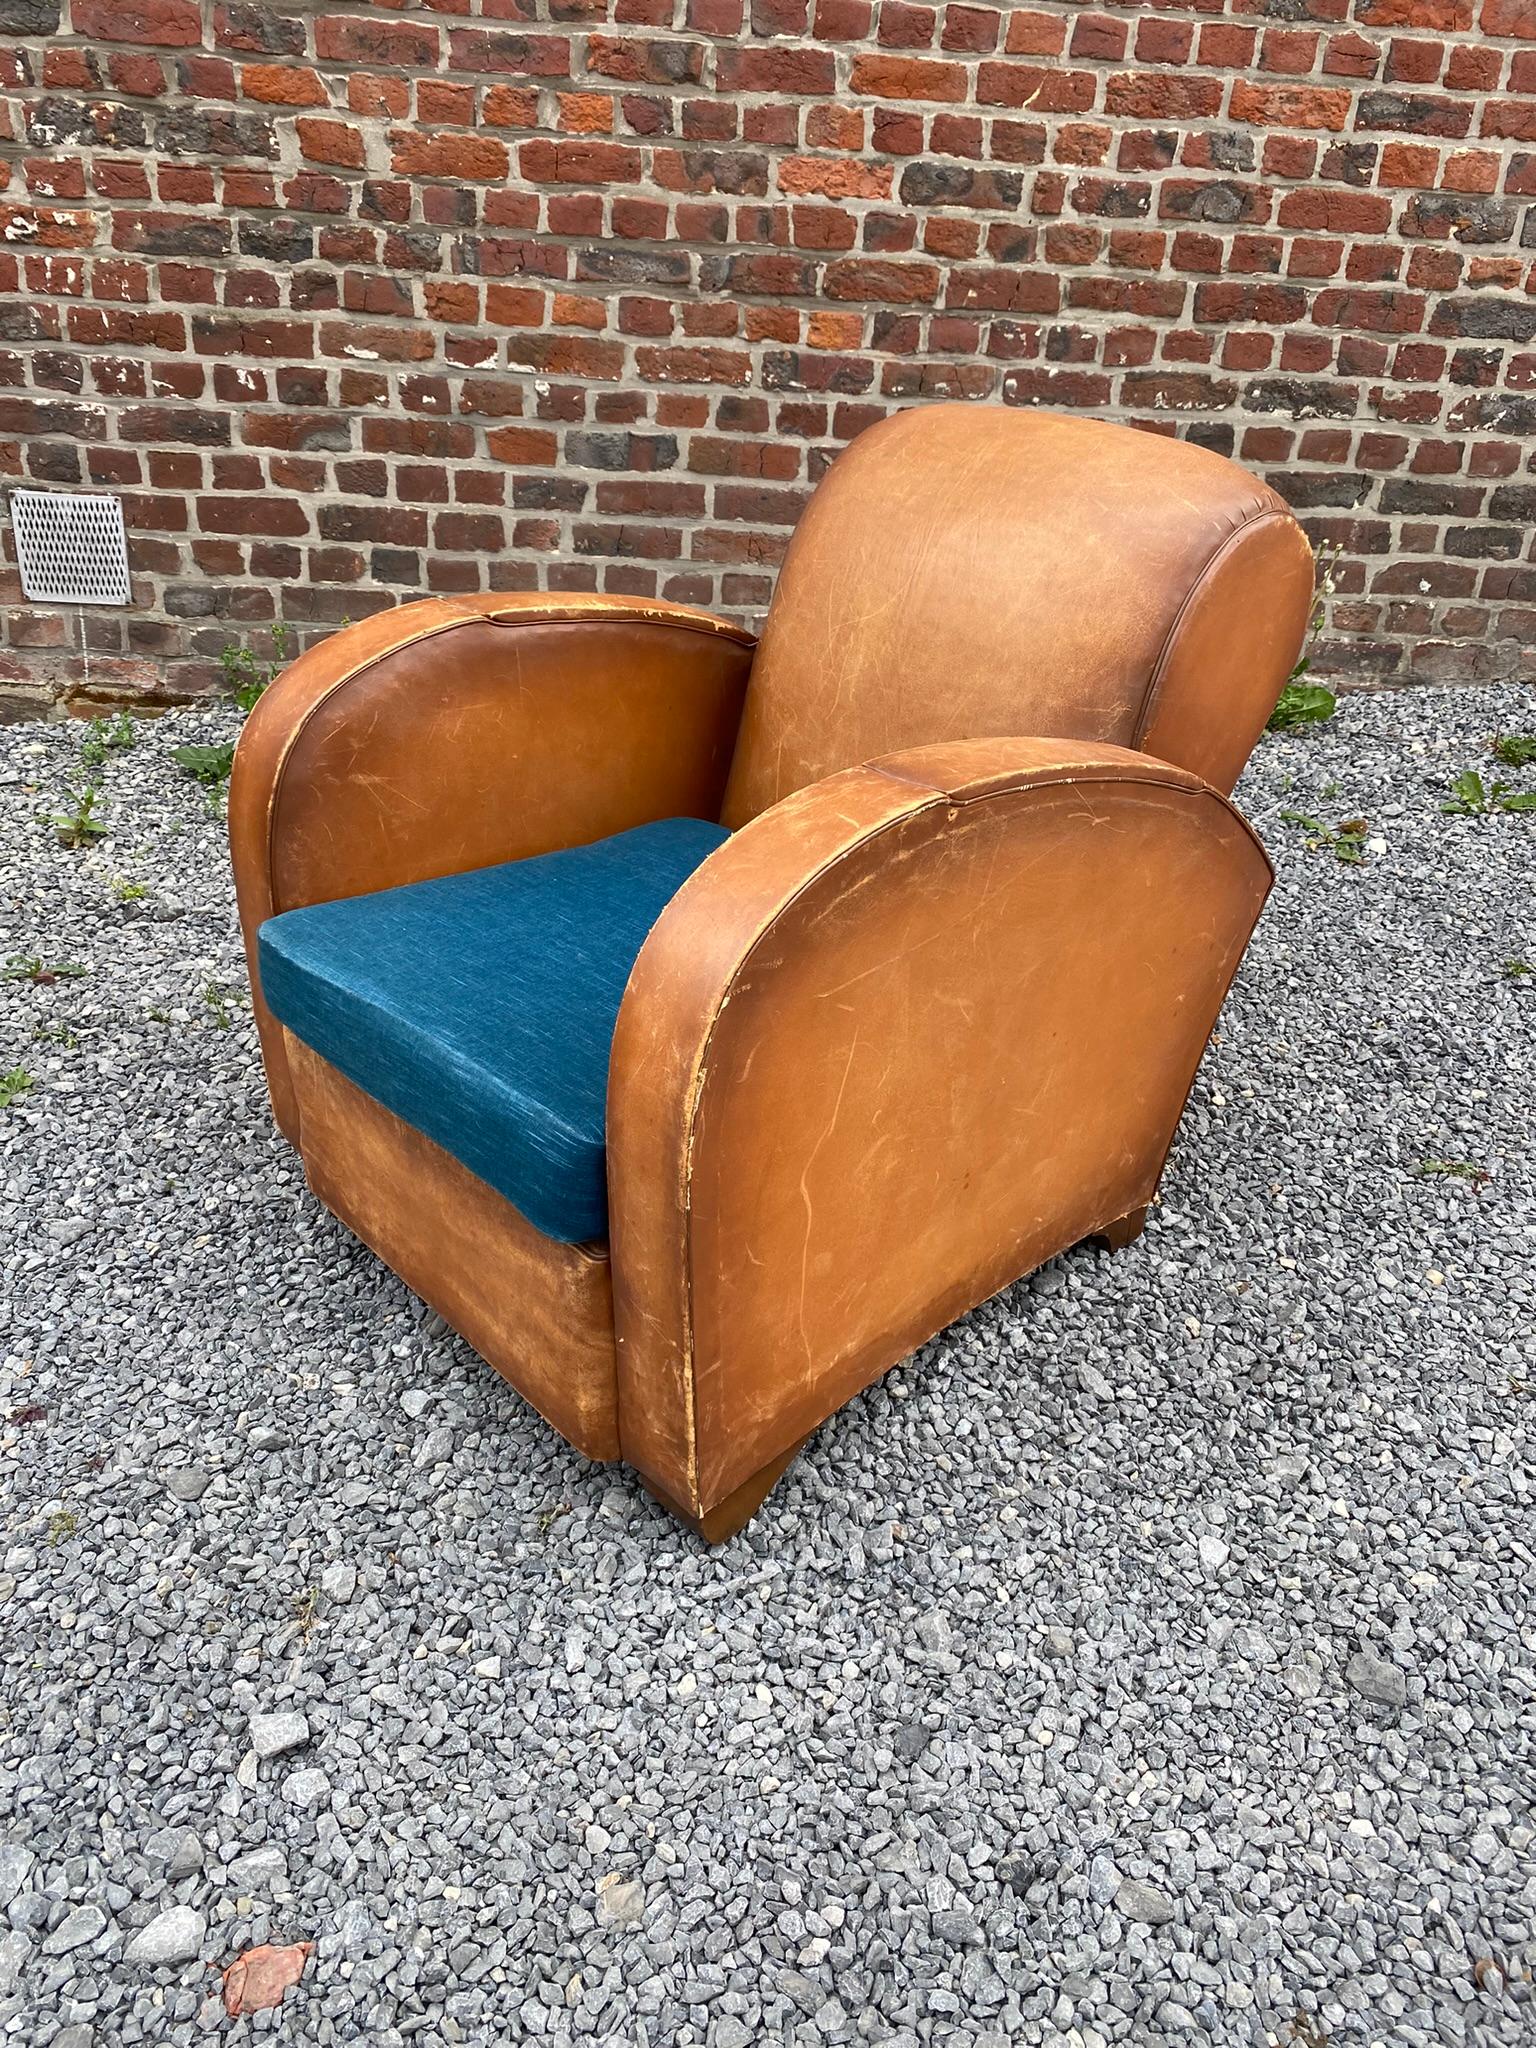 Art Deco armchairs covered in leather, circa 1930.
Lots of wear, but no holes or tears.
 